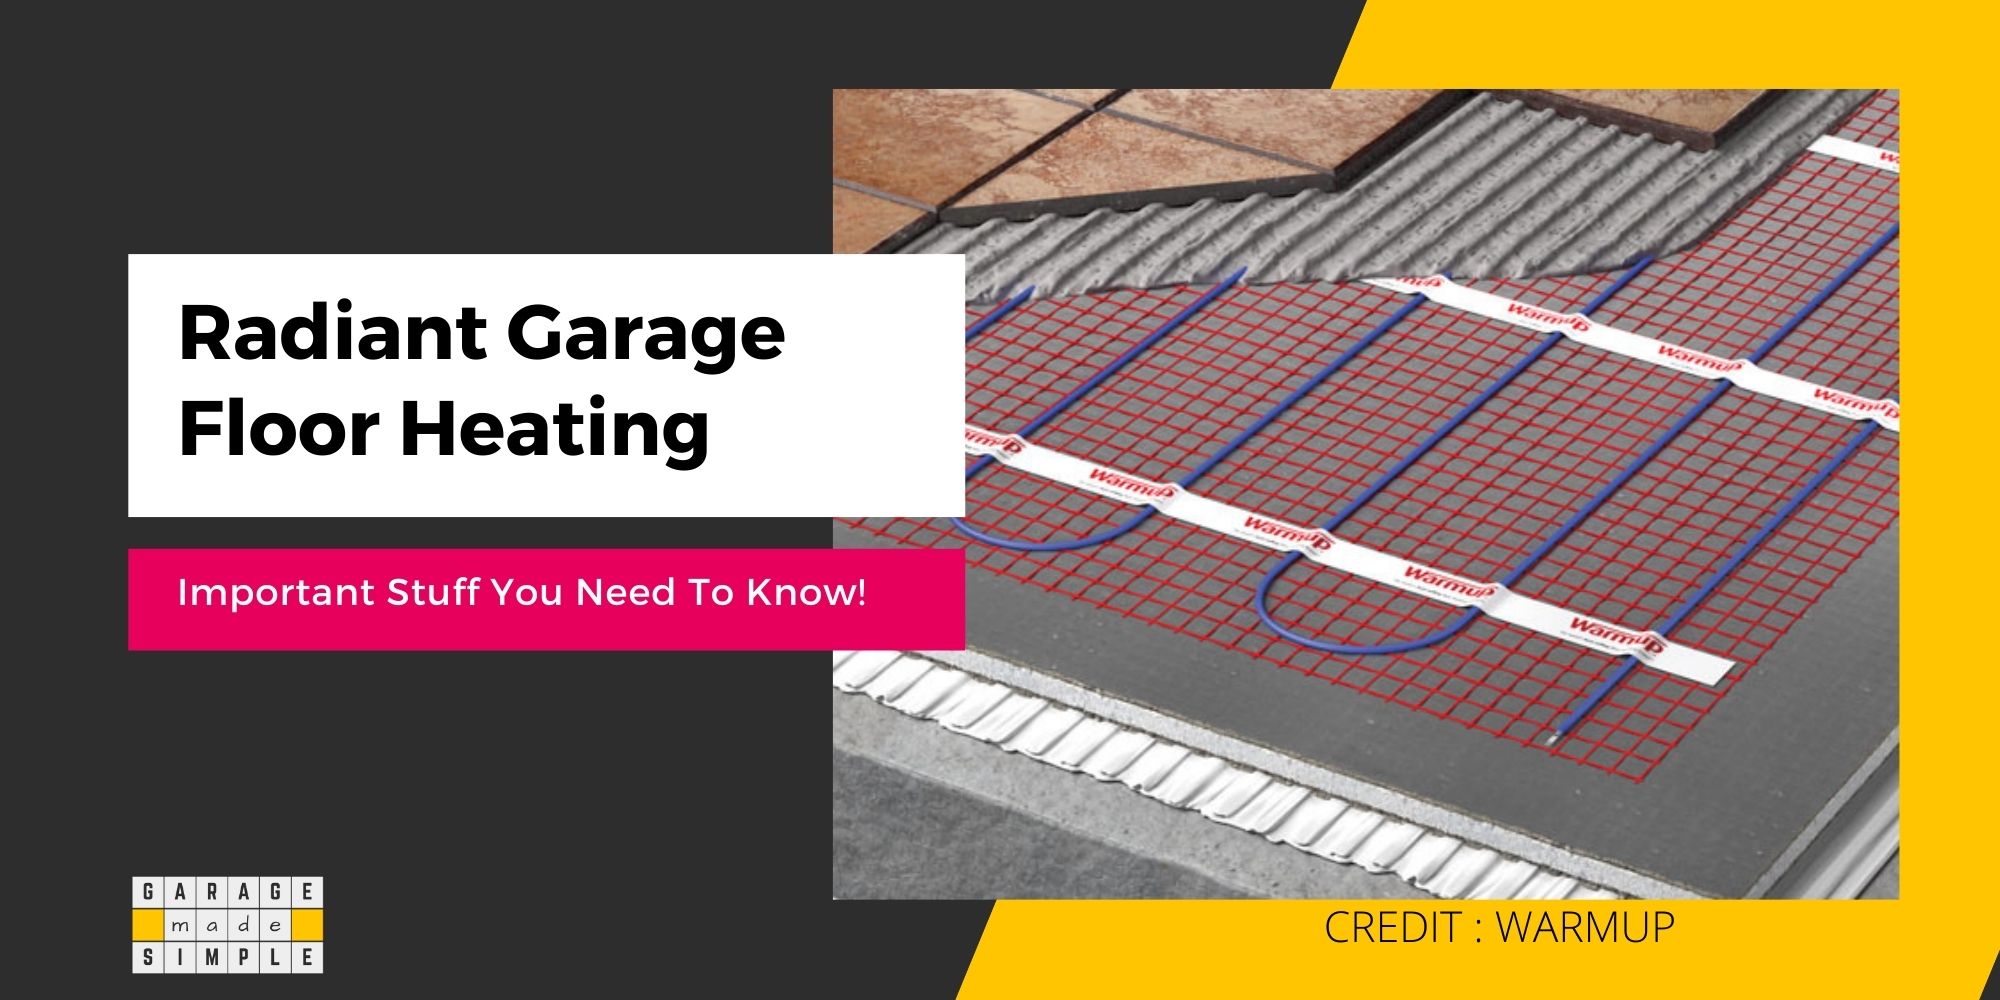 Radiant Garage Floor Heating (Important Things You Need to Know)